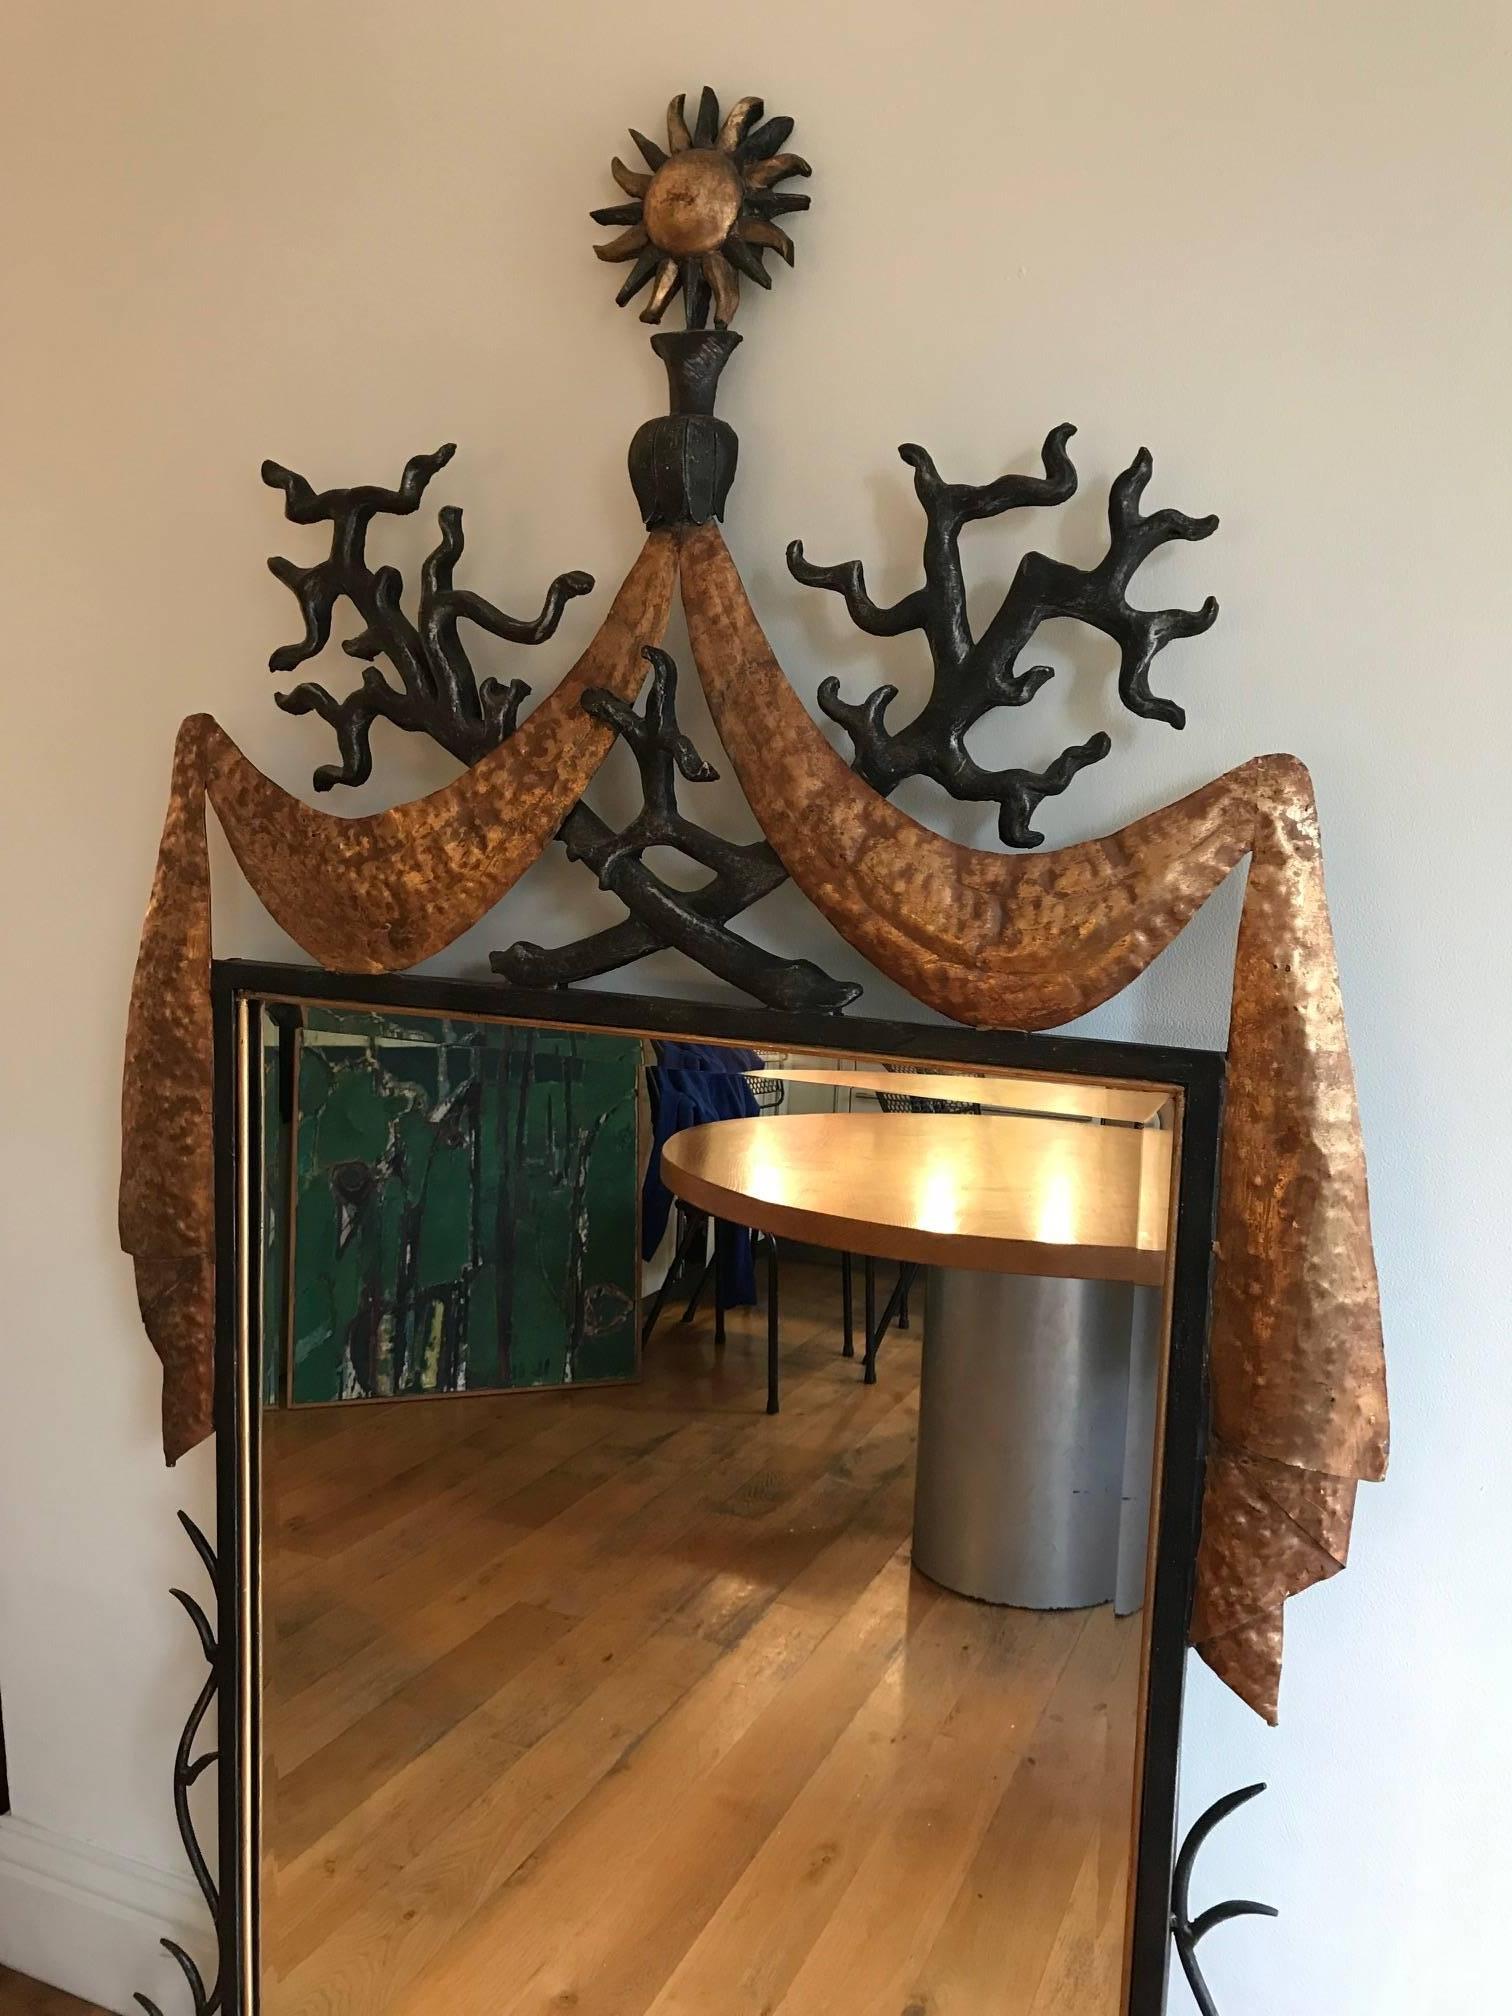 A large fantastic, decorative mirror made from iron, gilded metal and resin after a design by the French designer Gilbert Poillerat.